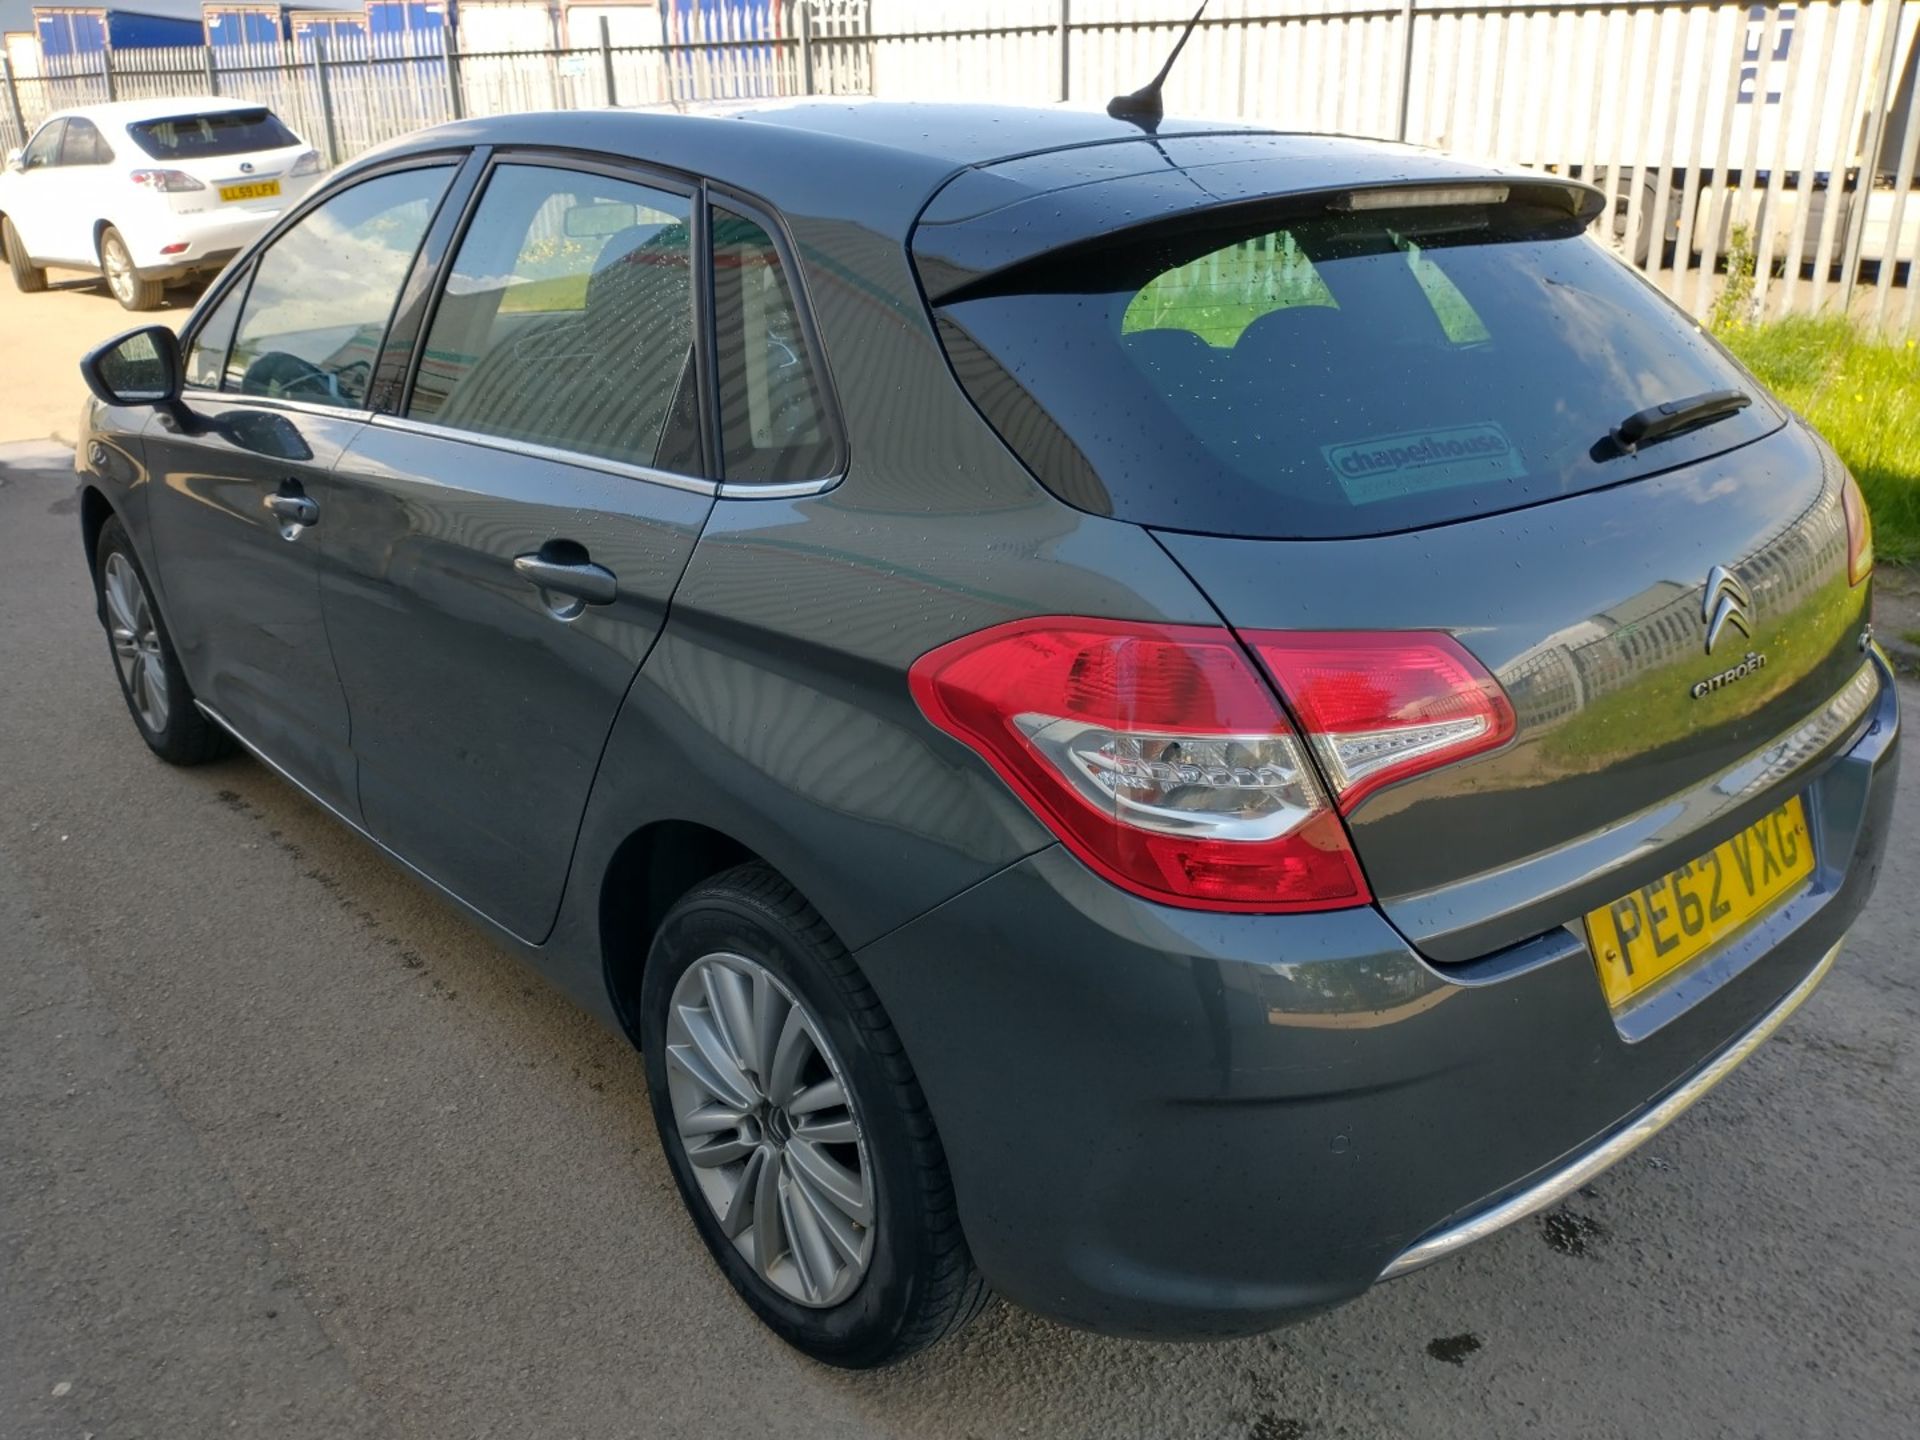 2012 Citreon C4 VTR+ Hdi 91 5dr Hatchback - CL505 - NO VAT ON THE HAMMER - Location: Corby - Image 20 of 20